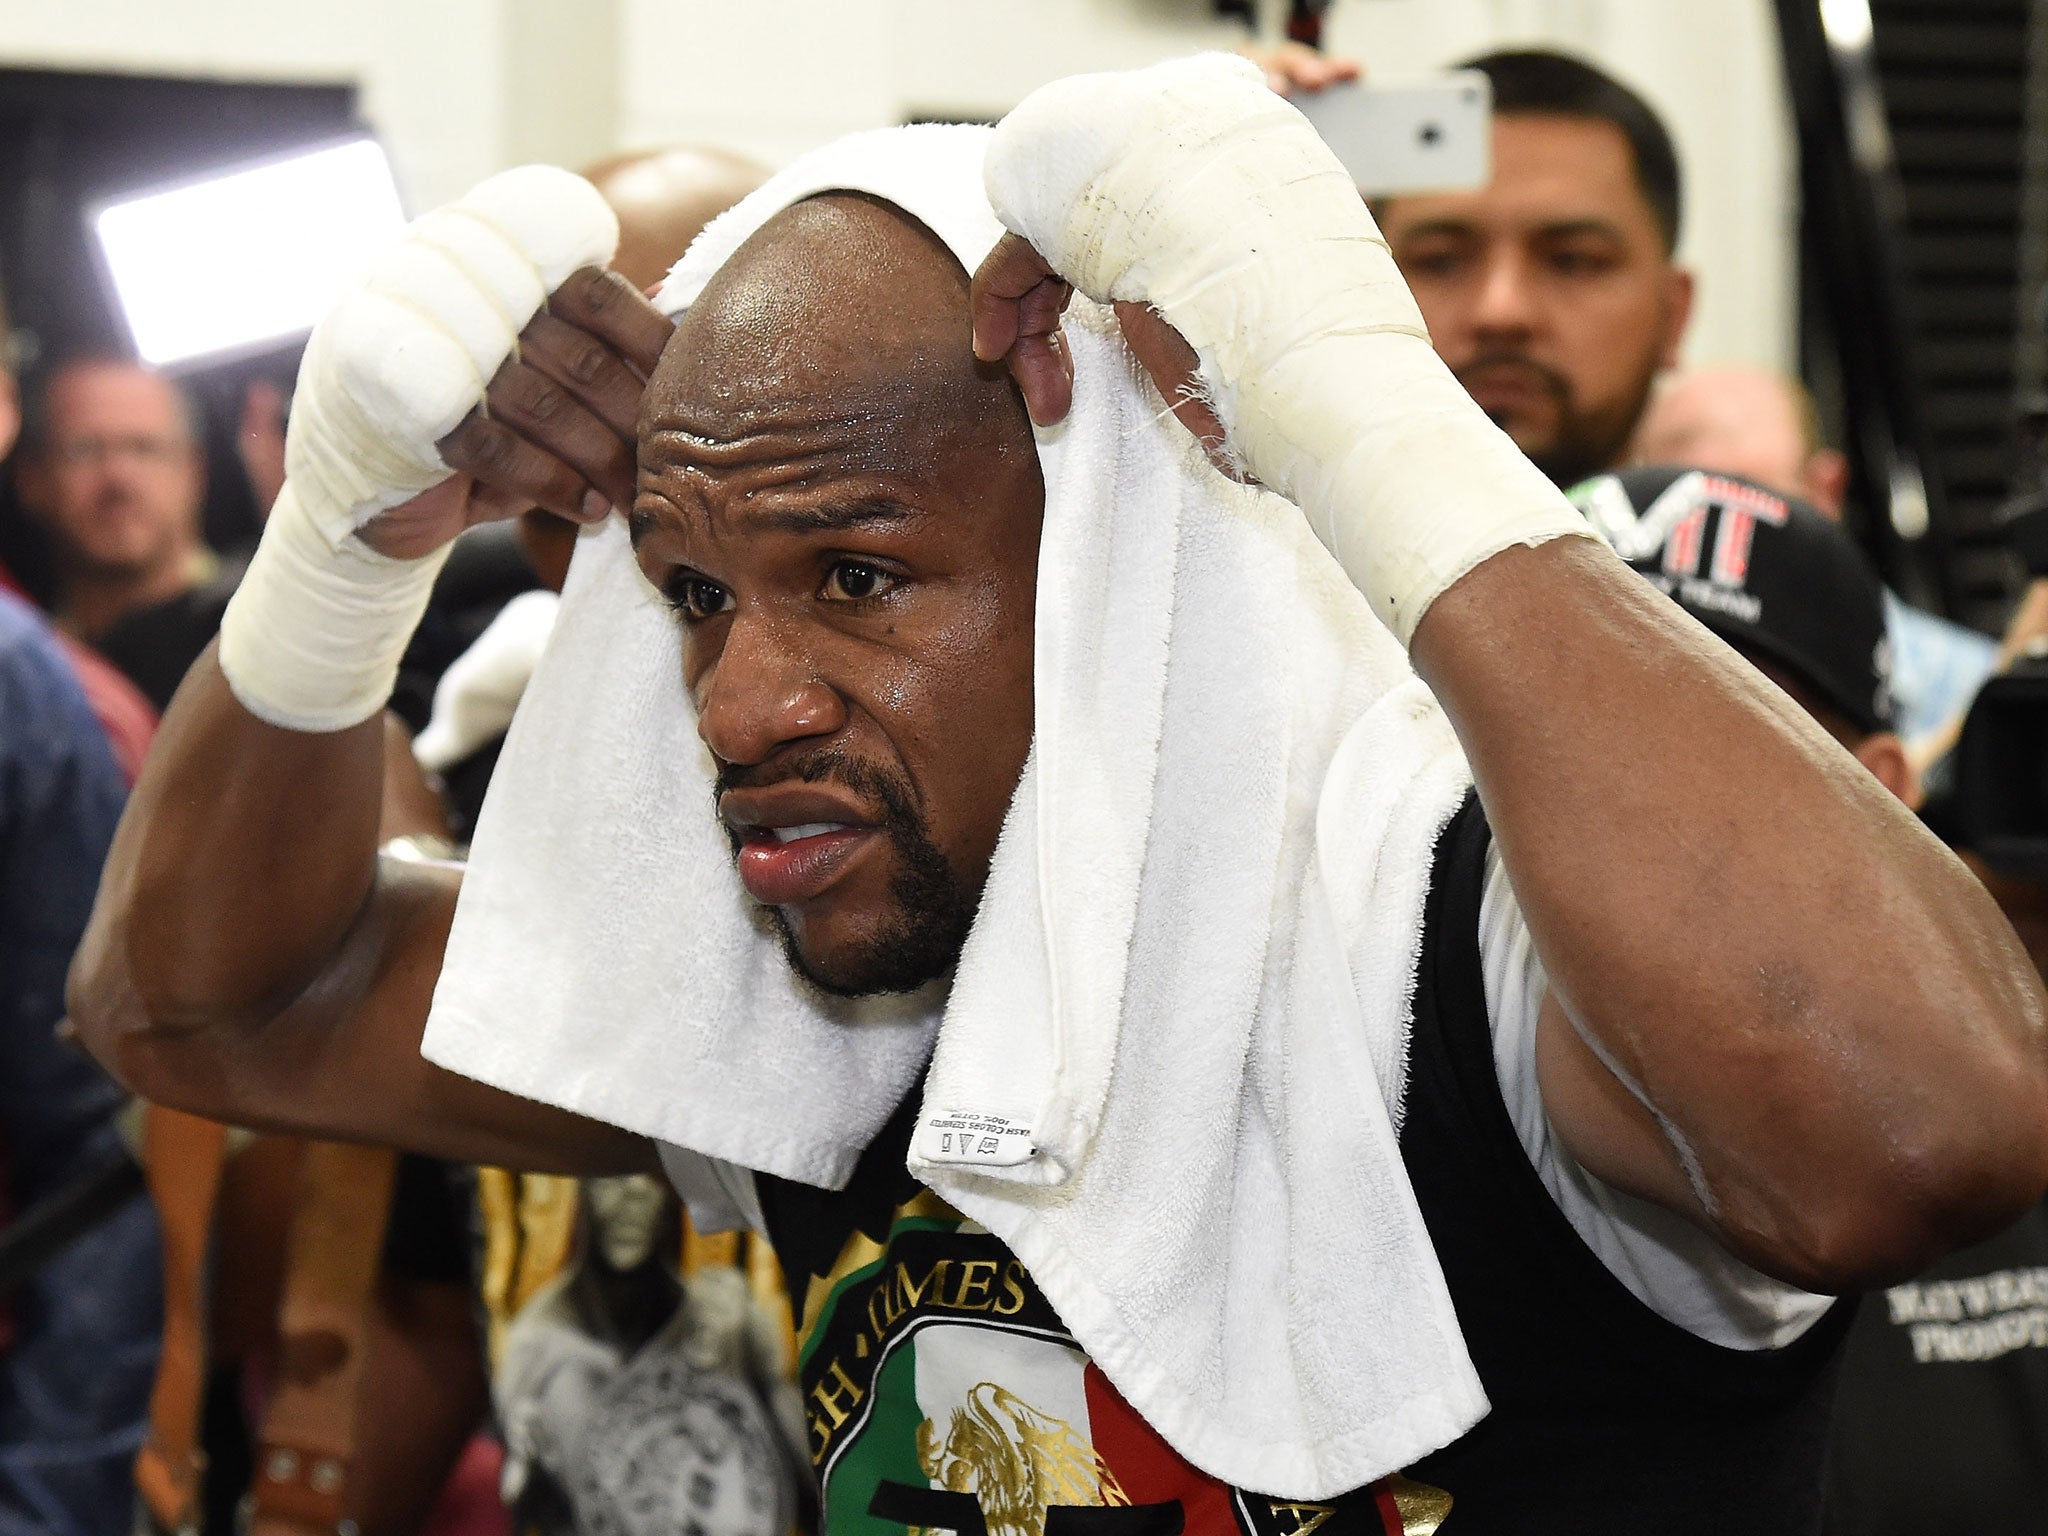 Floyd Mayweather at his final open training session